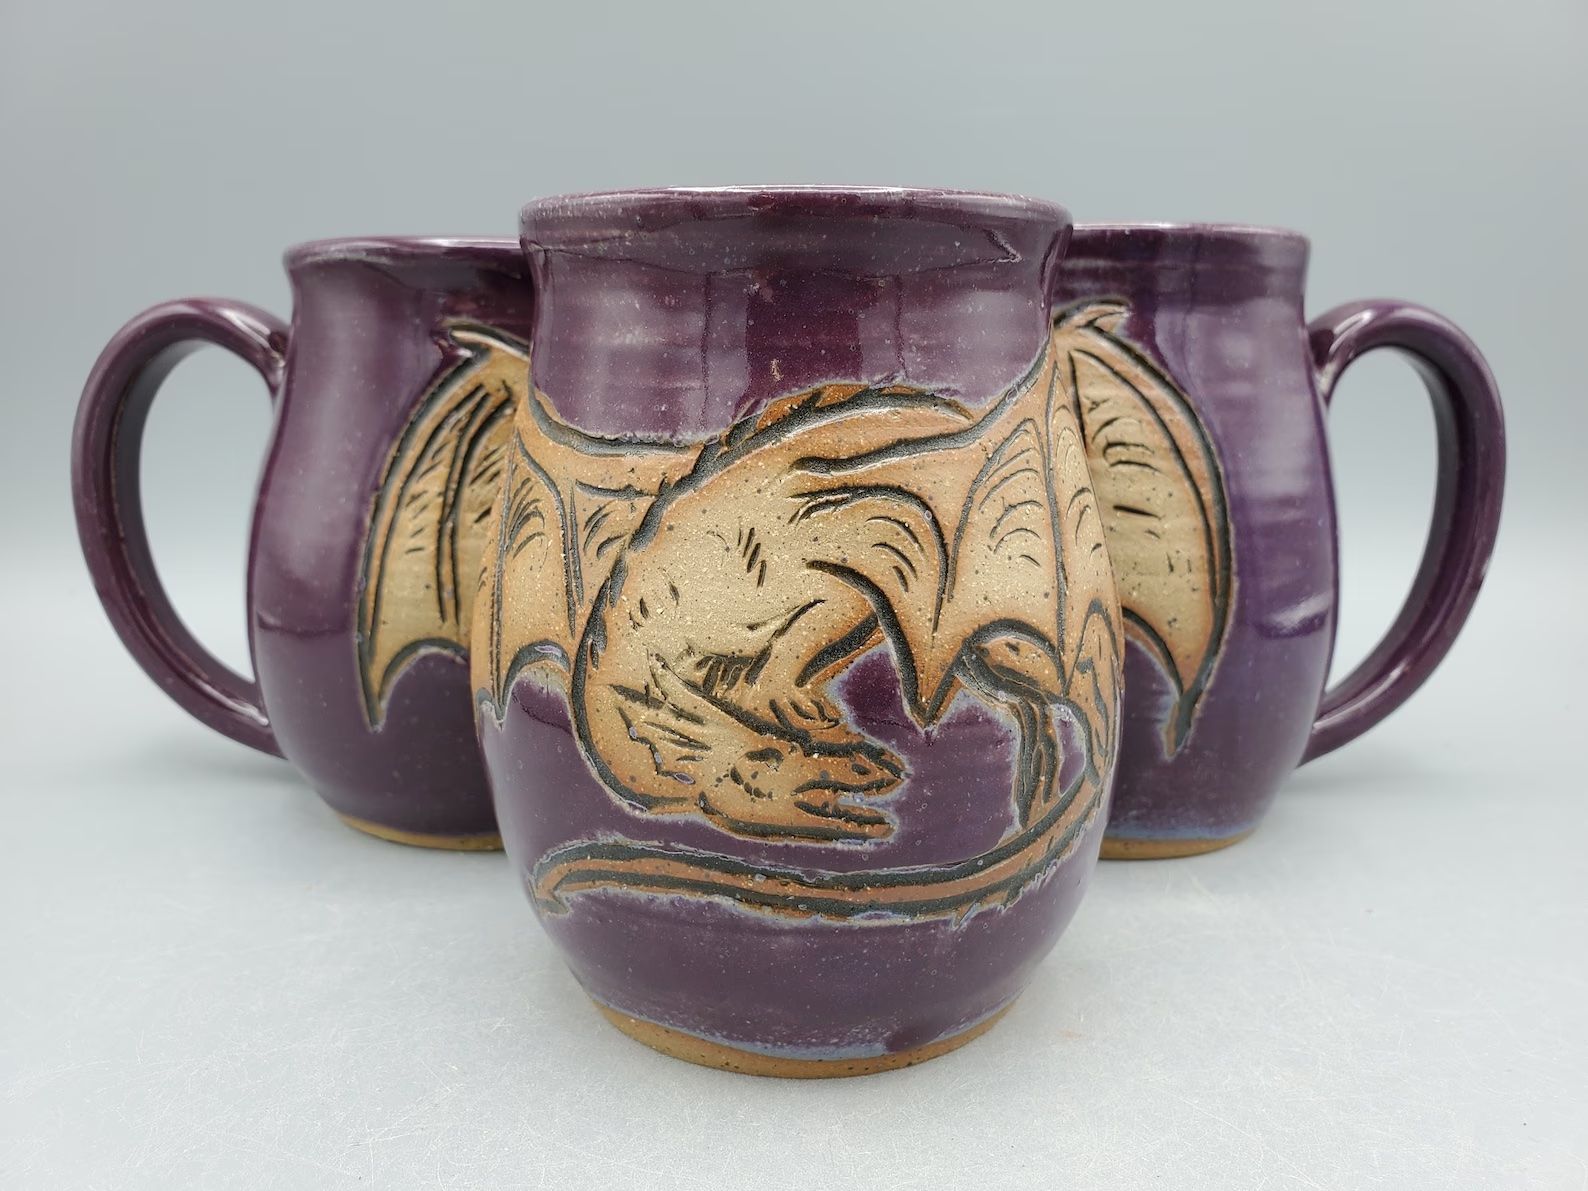 Three purple mugs set in a triangle to form a single dragon sit on a white background. 